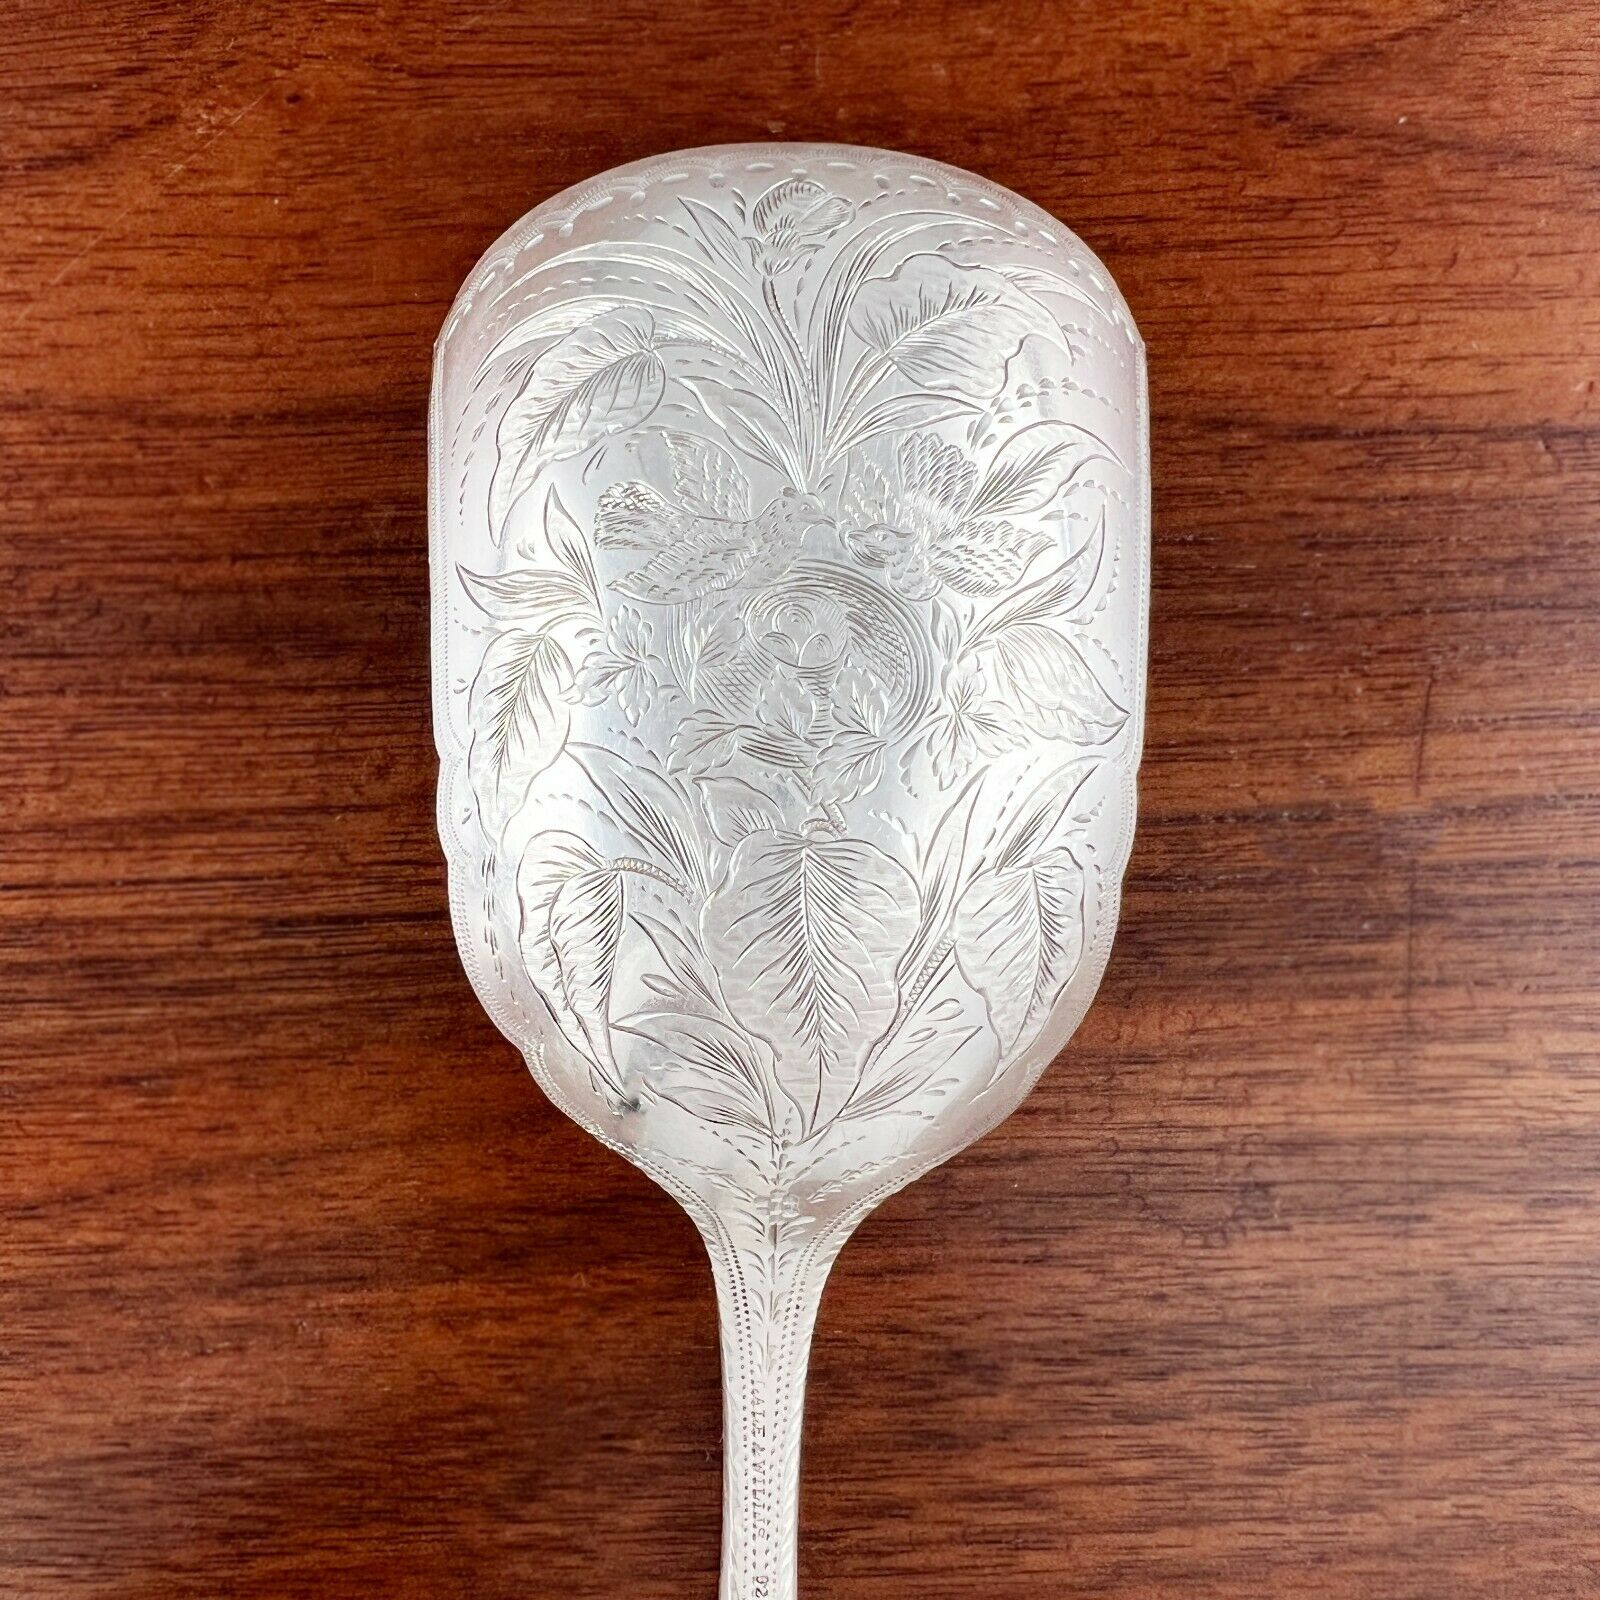 Antique Valuations: GALE & WILLIS AESTHETIC STERLING SILVER CRACKER SCOOP CHASED BIRDS & NEST C.1900